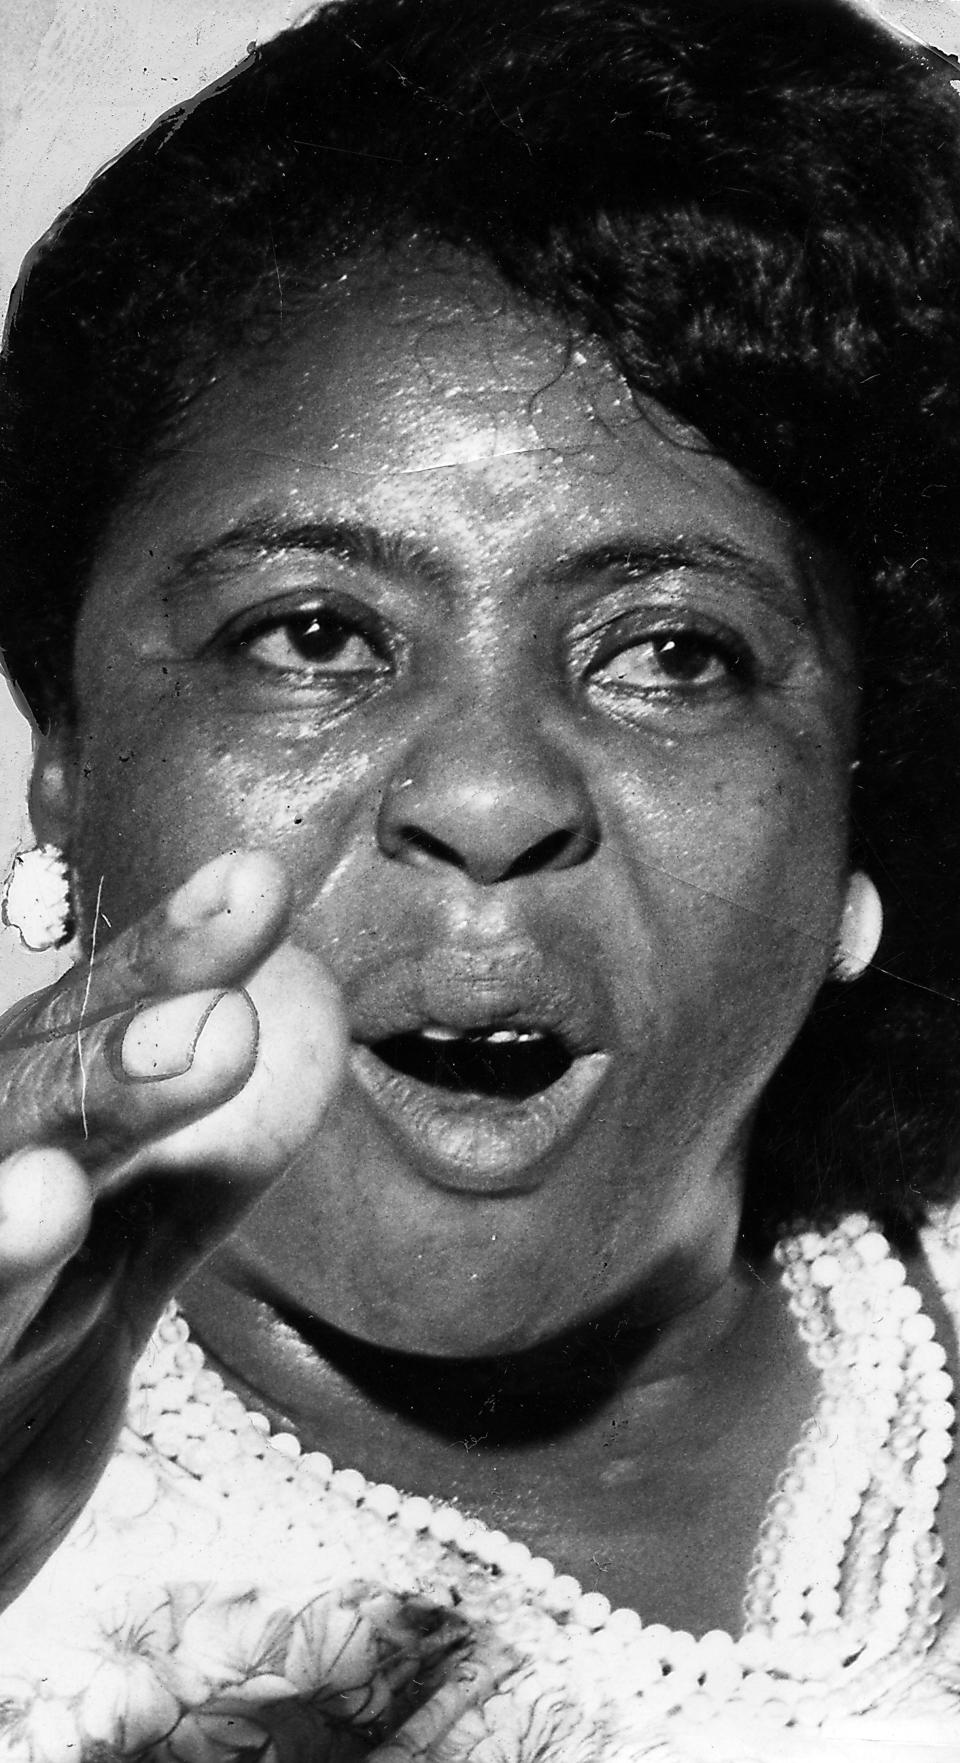 <a href="http://www.biography.com/people/fannie-lou-hamer-205625" target="_blank">Hamer</a> was a&nbsp;civil rights activist and organizer of the Student Nonviolent Coordinating Committee Fannie Lou Hamer. She helped blacks register to vote and co-founded the Mississippi Freedom Democratic Party.&nbsp;